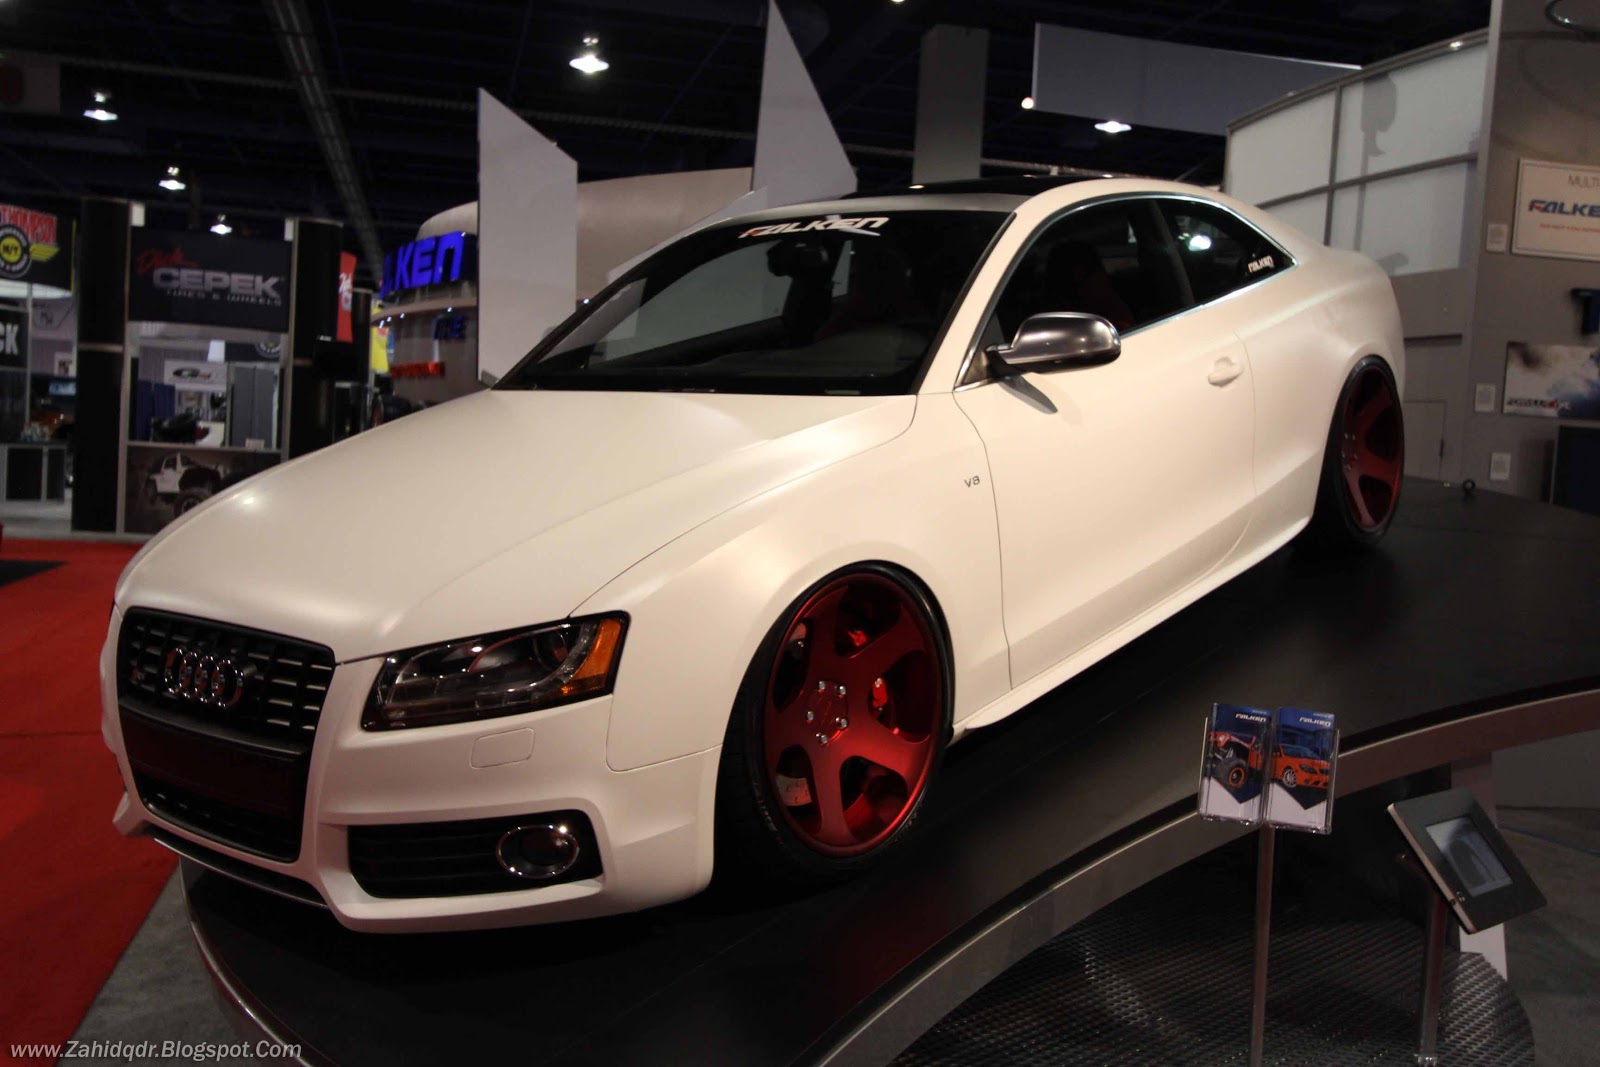 Audi A5 HD Wallpaper Red Wheel White Colour Learning And